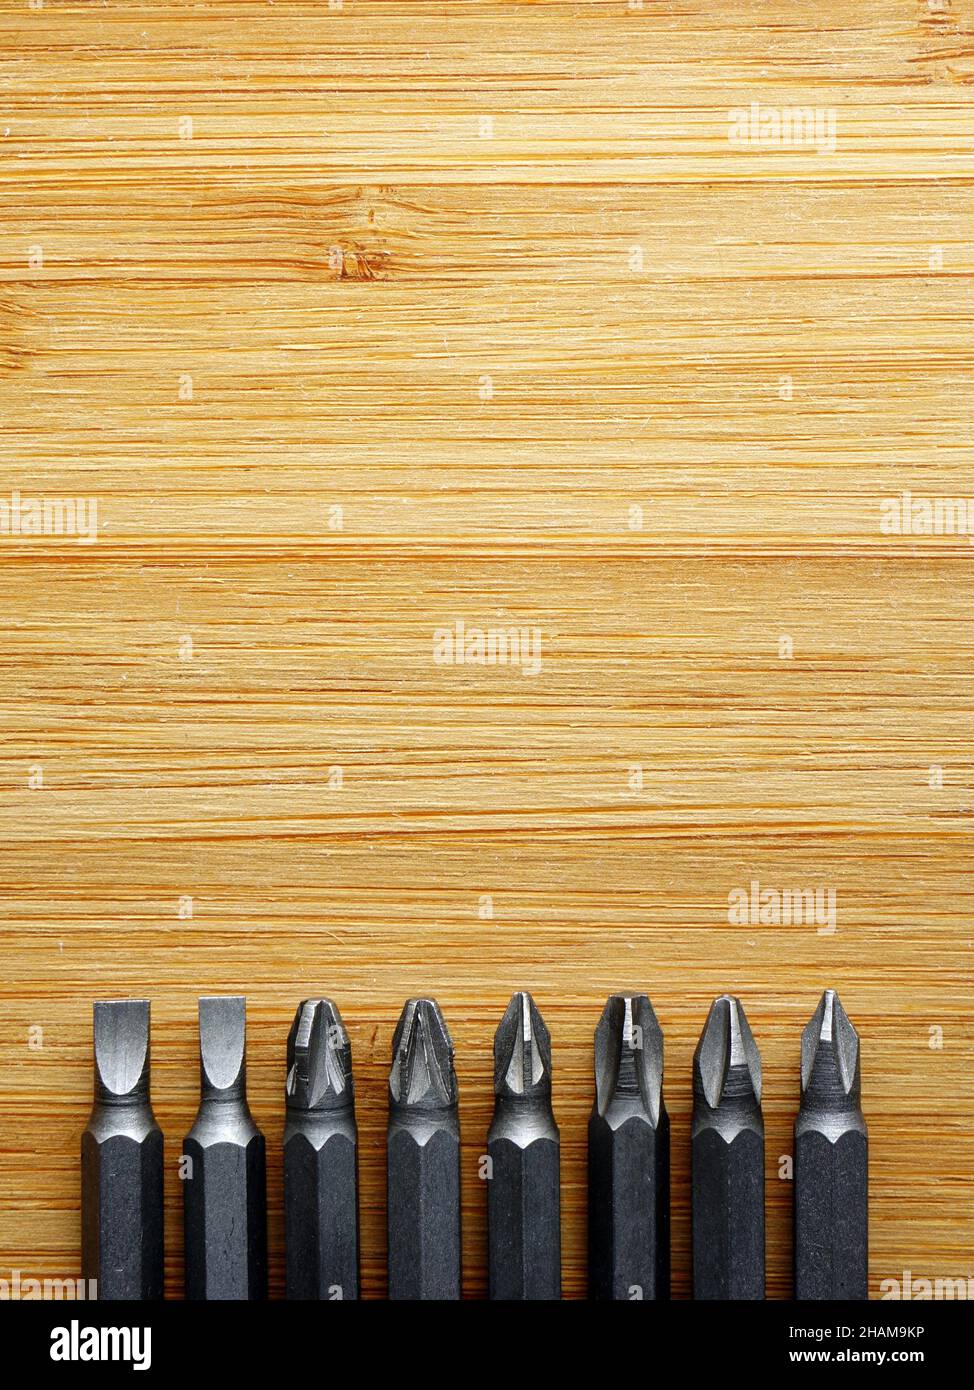 Set of screwdrivers on wooden background with copy space Stock Photo